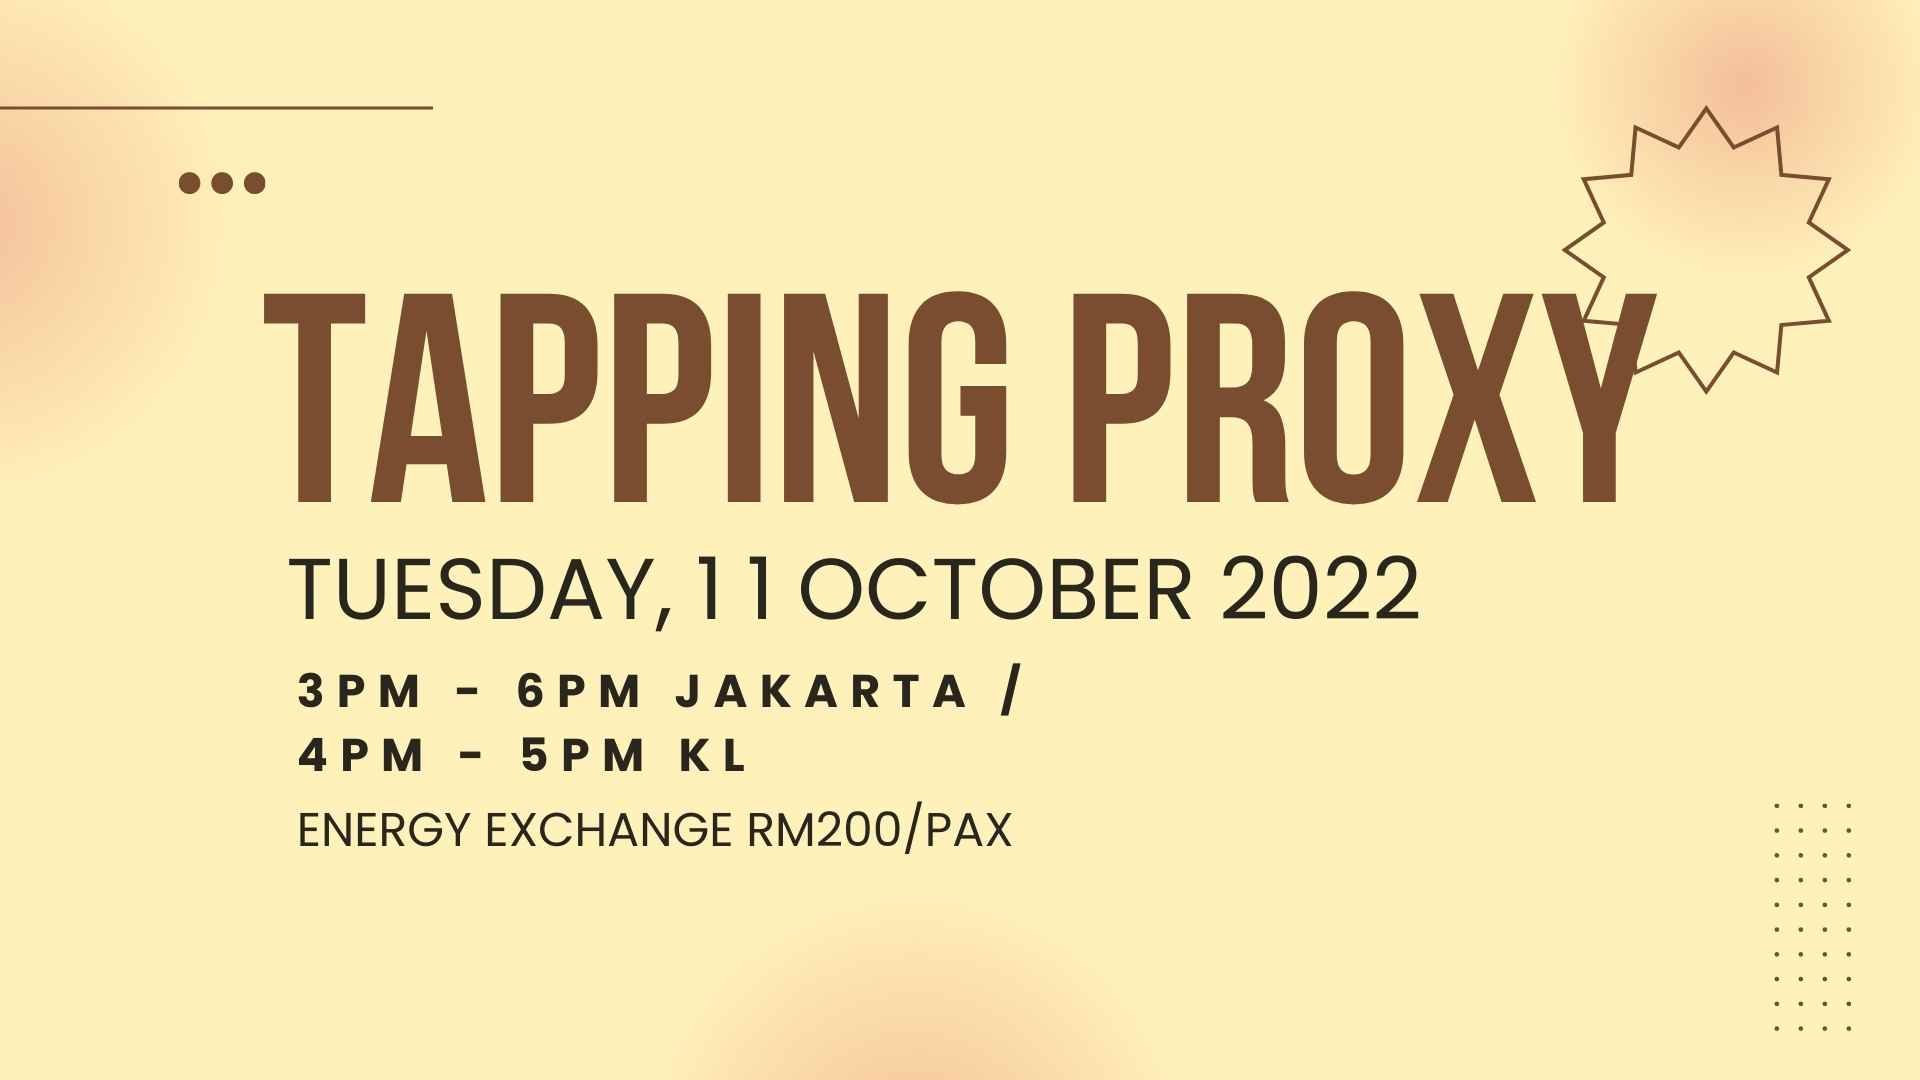 TAPPING PROXY